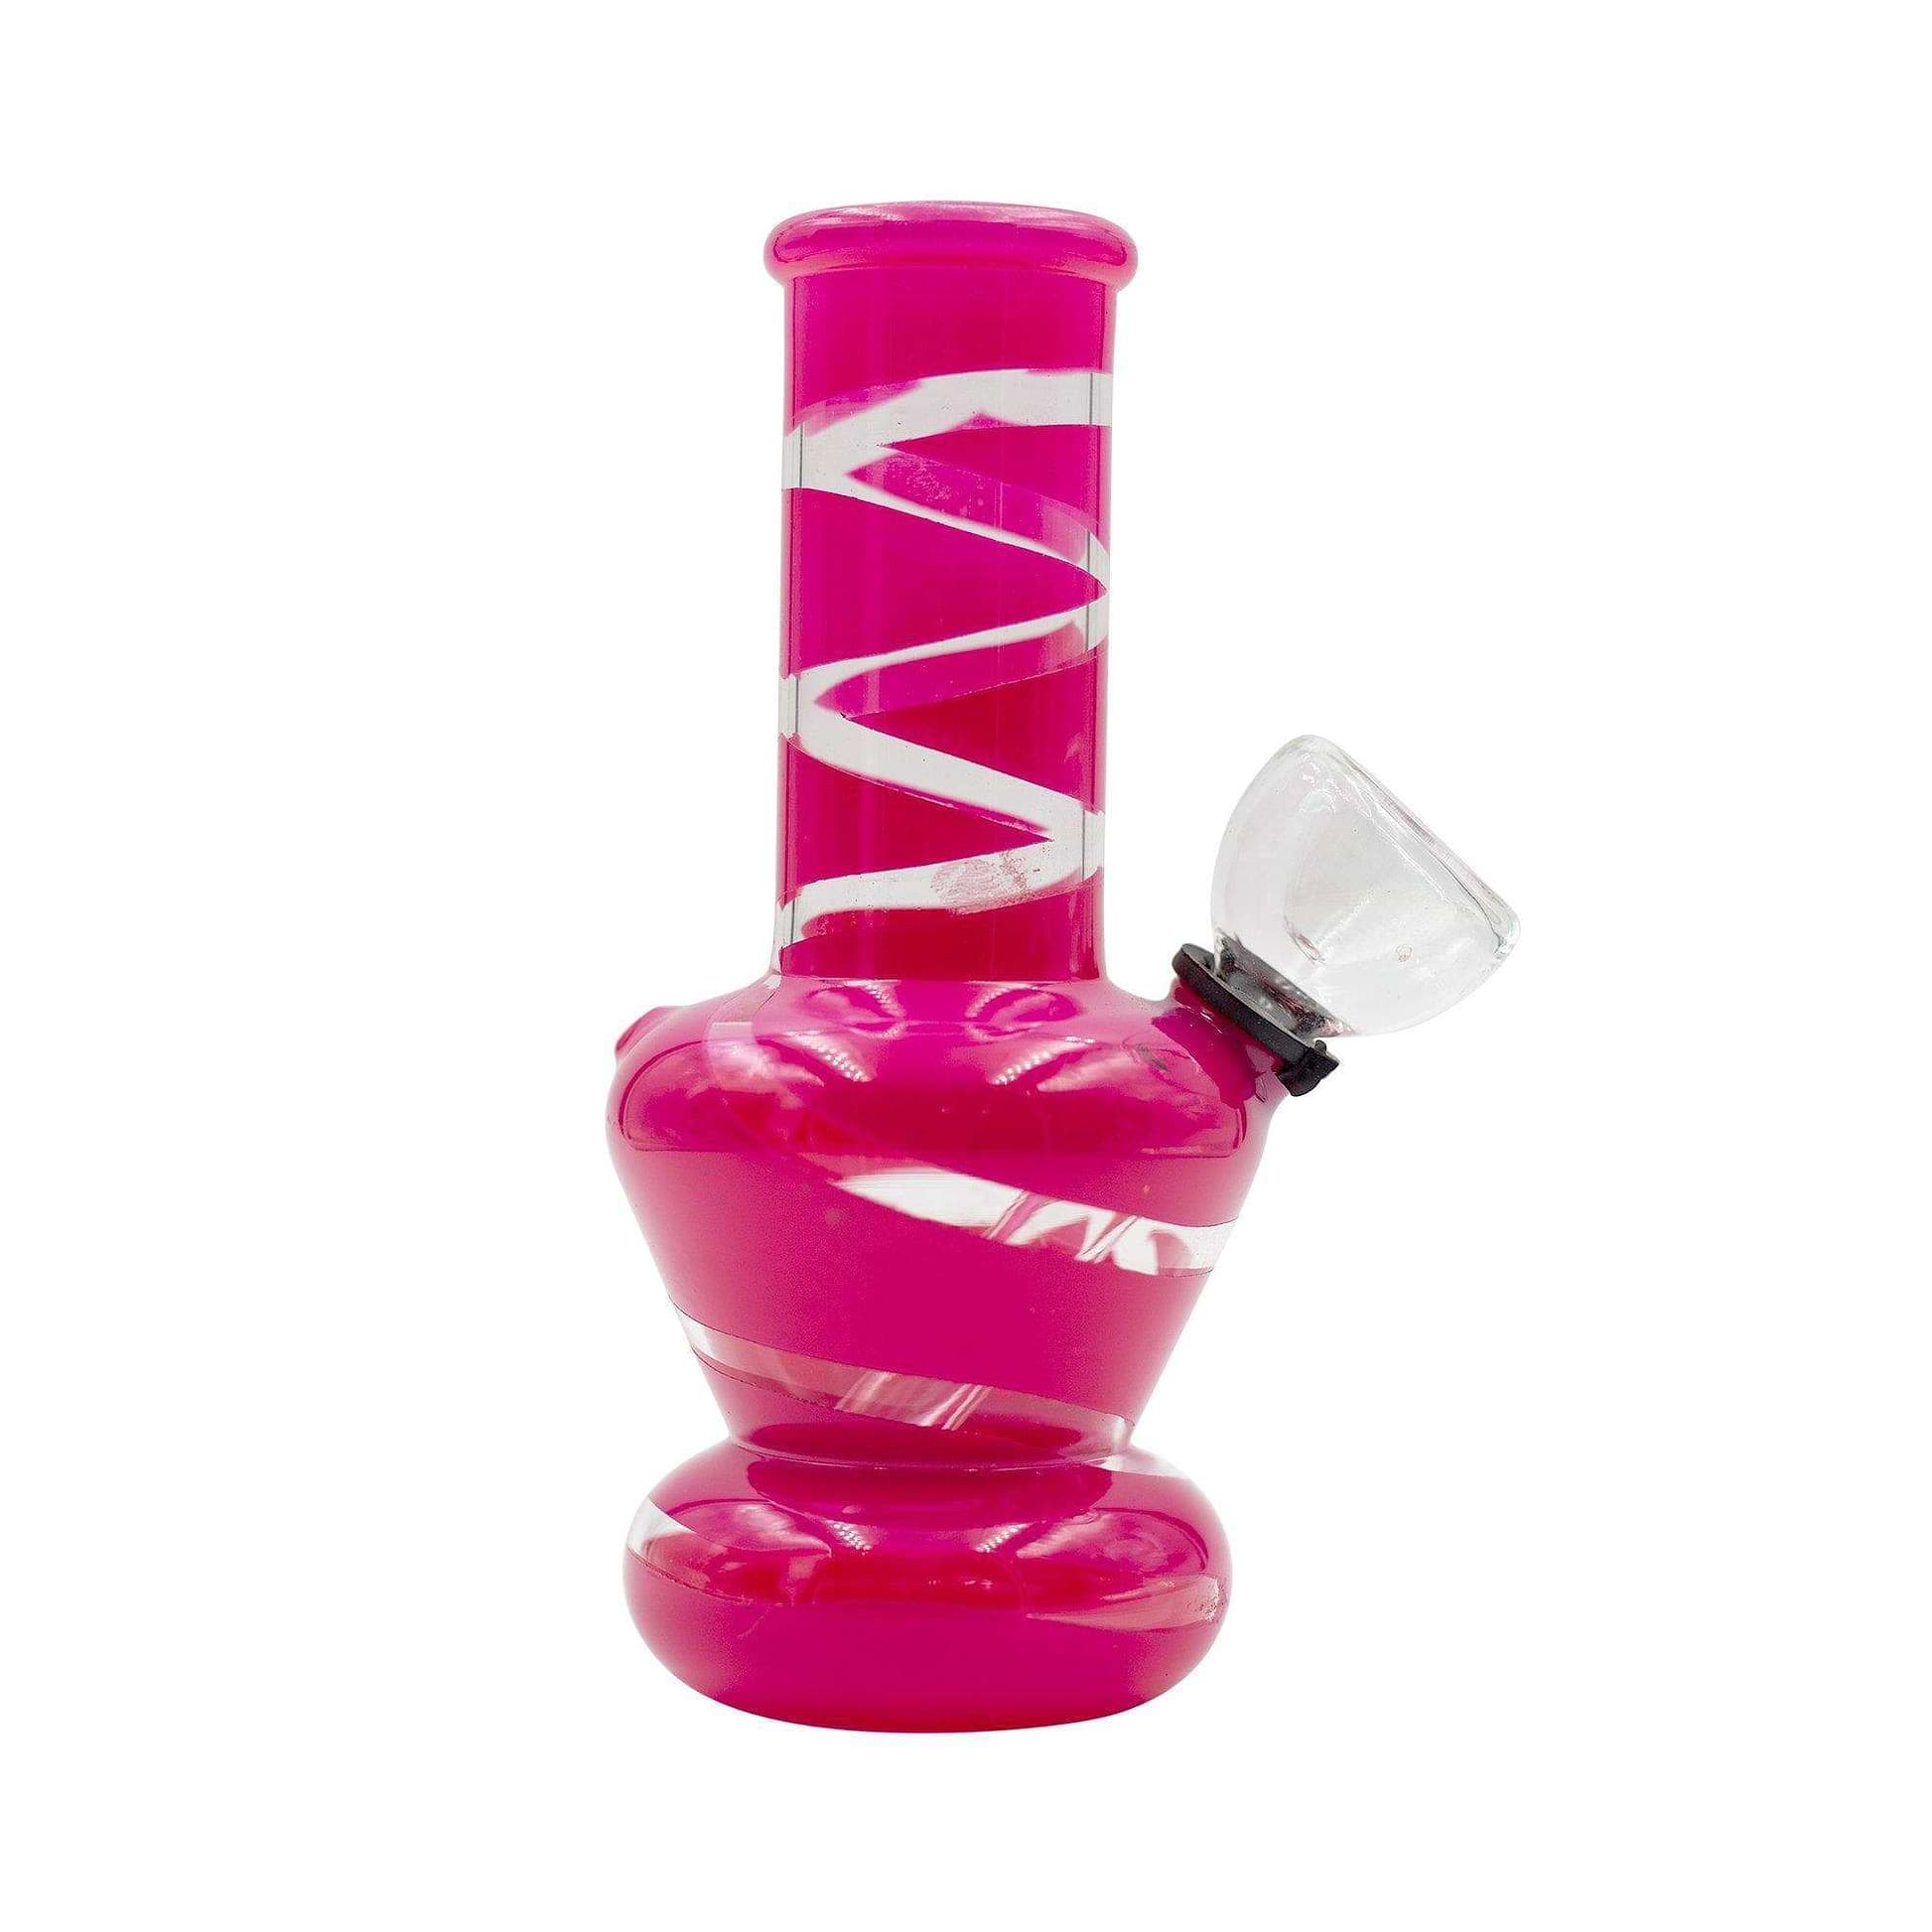 5-inch mini carb bong smoking device clear mouthpiece sleek striped design hot pink color